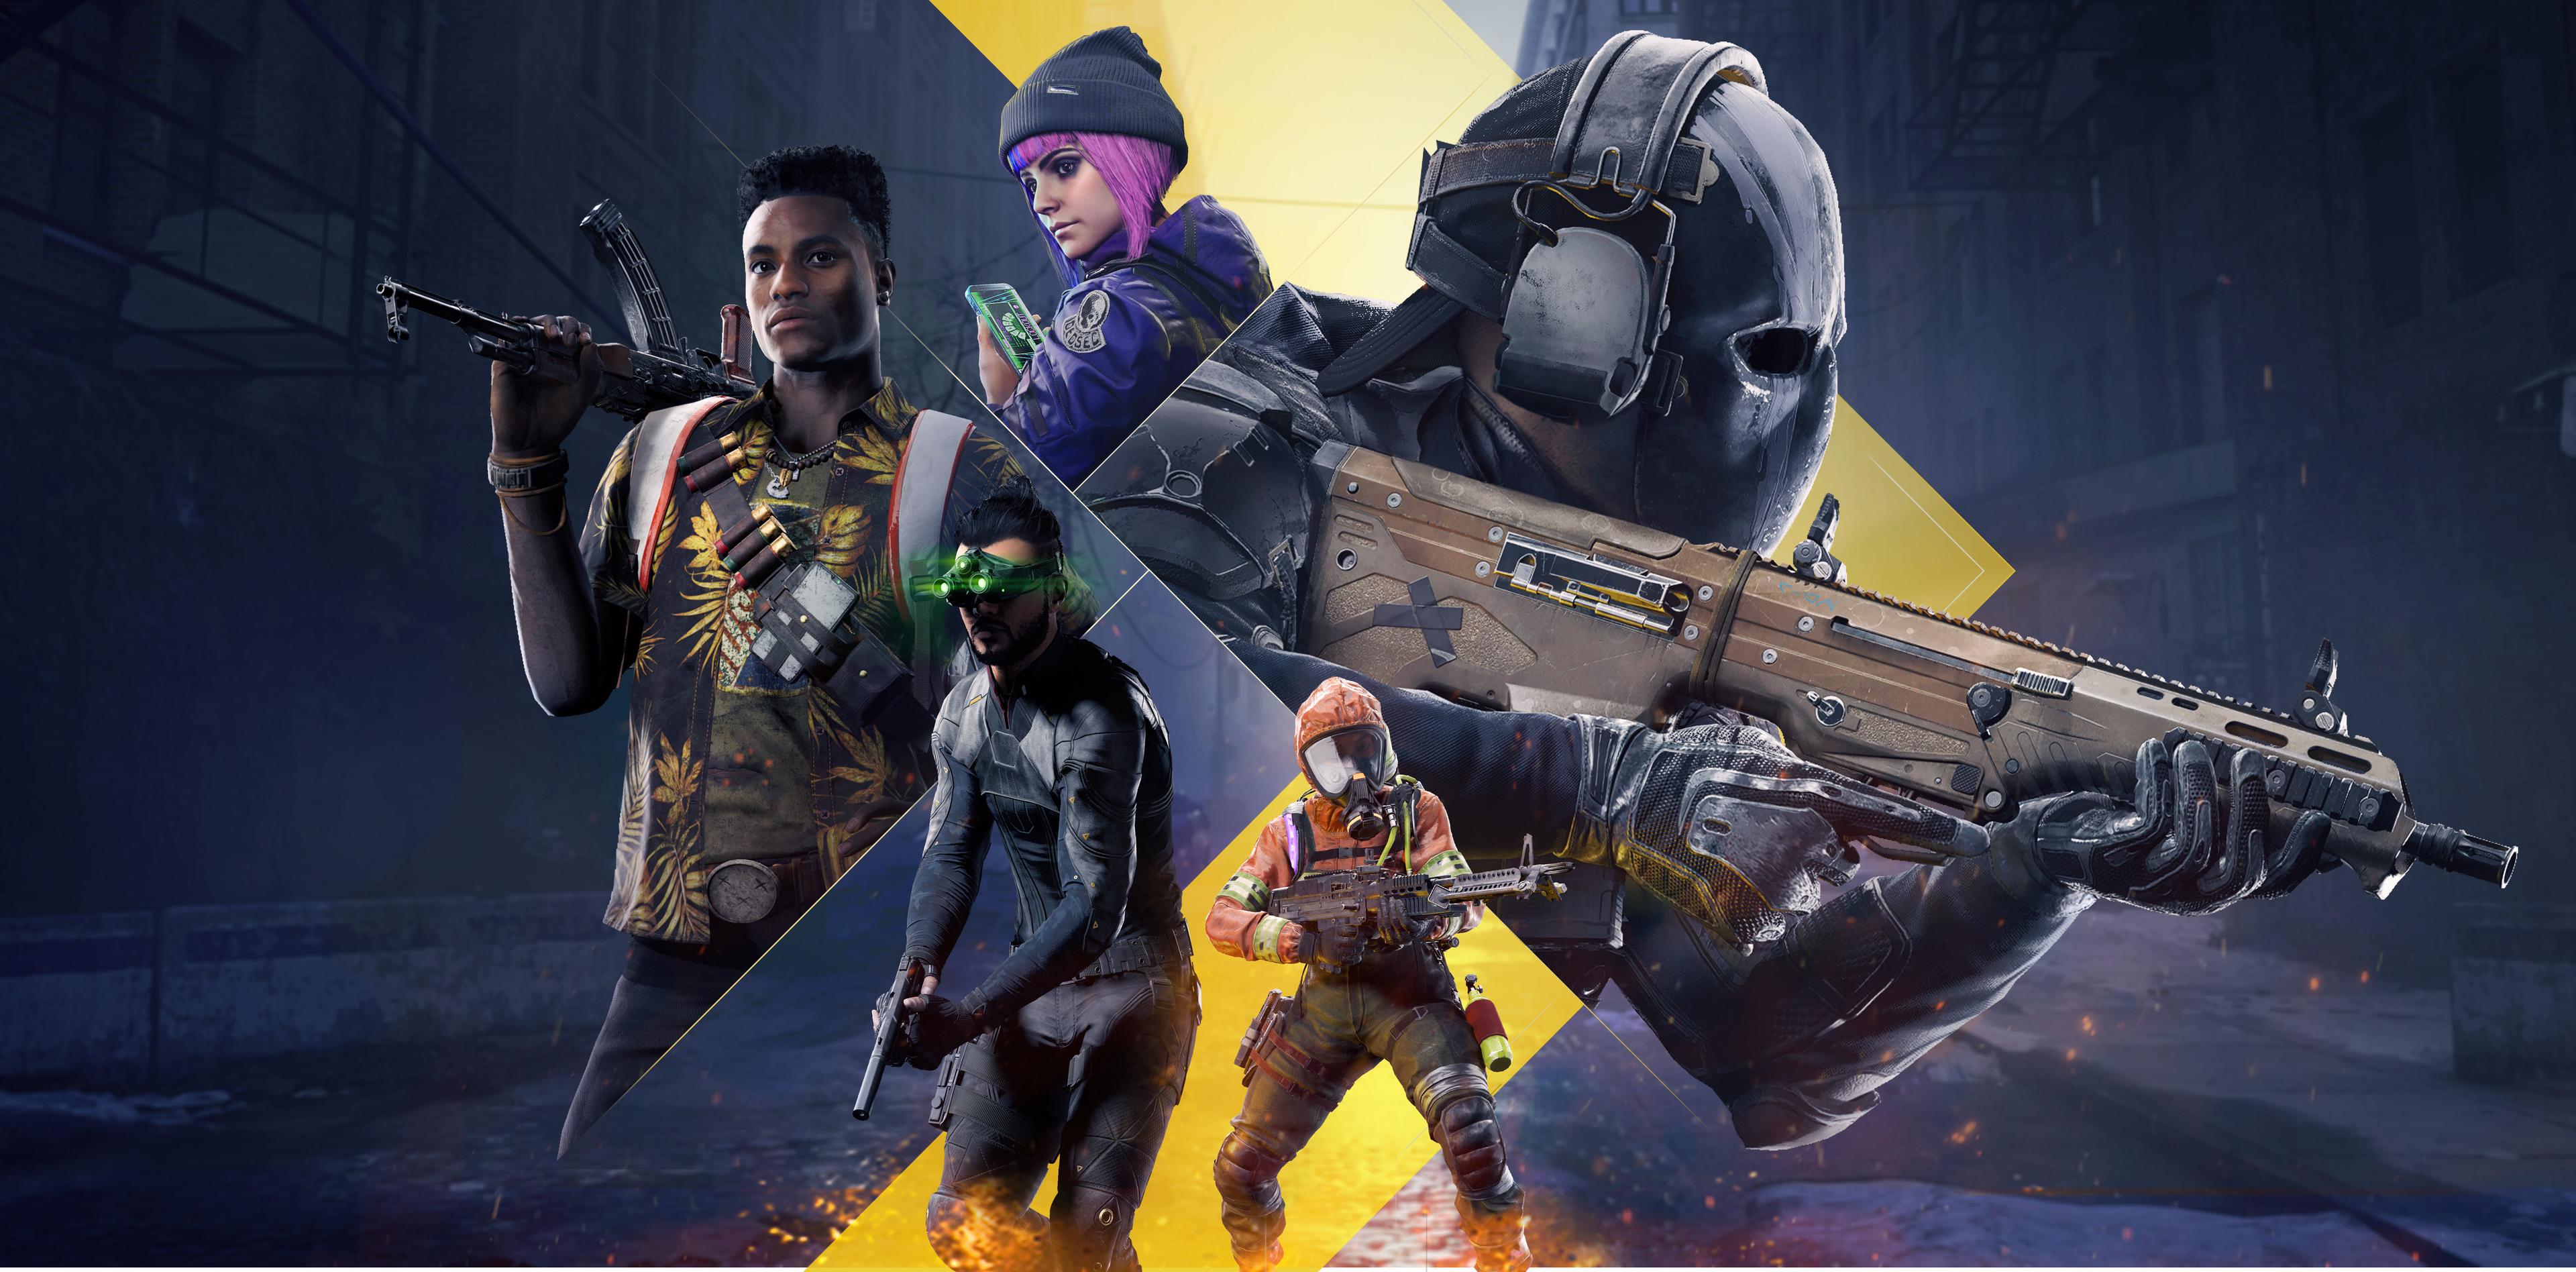 XDefiant key art showing various factions